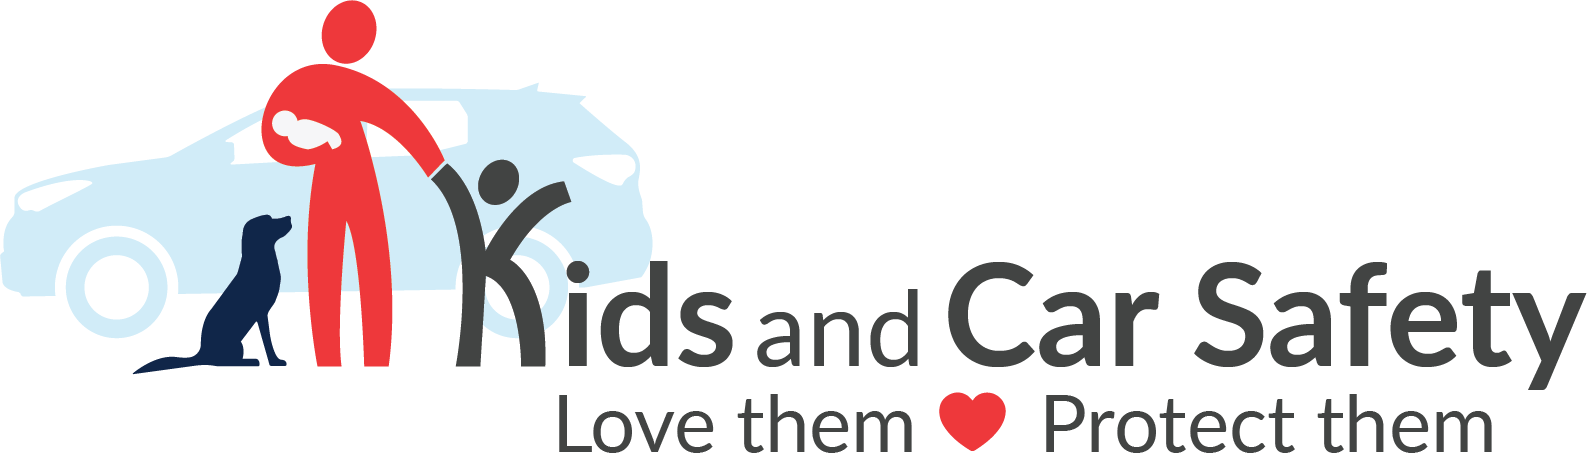 kid cars and safety site logo